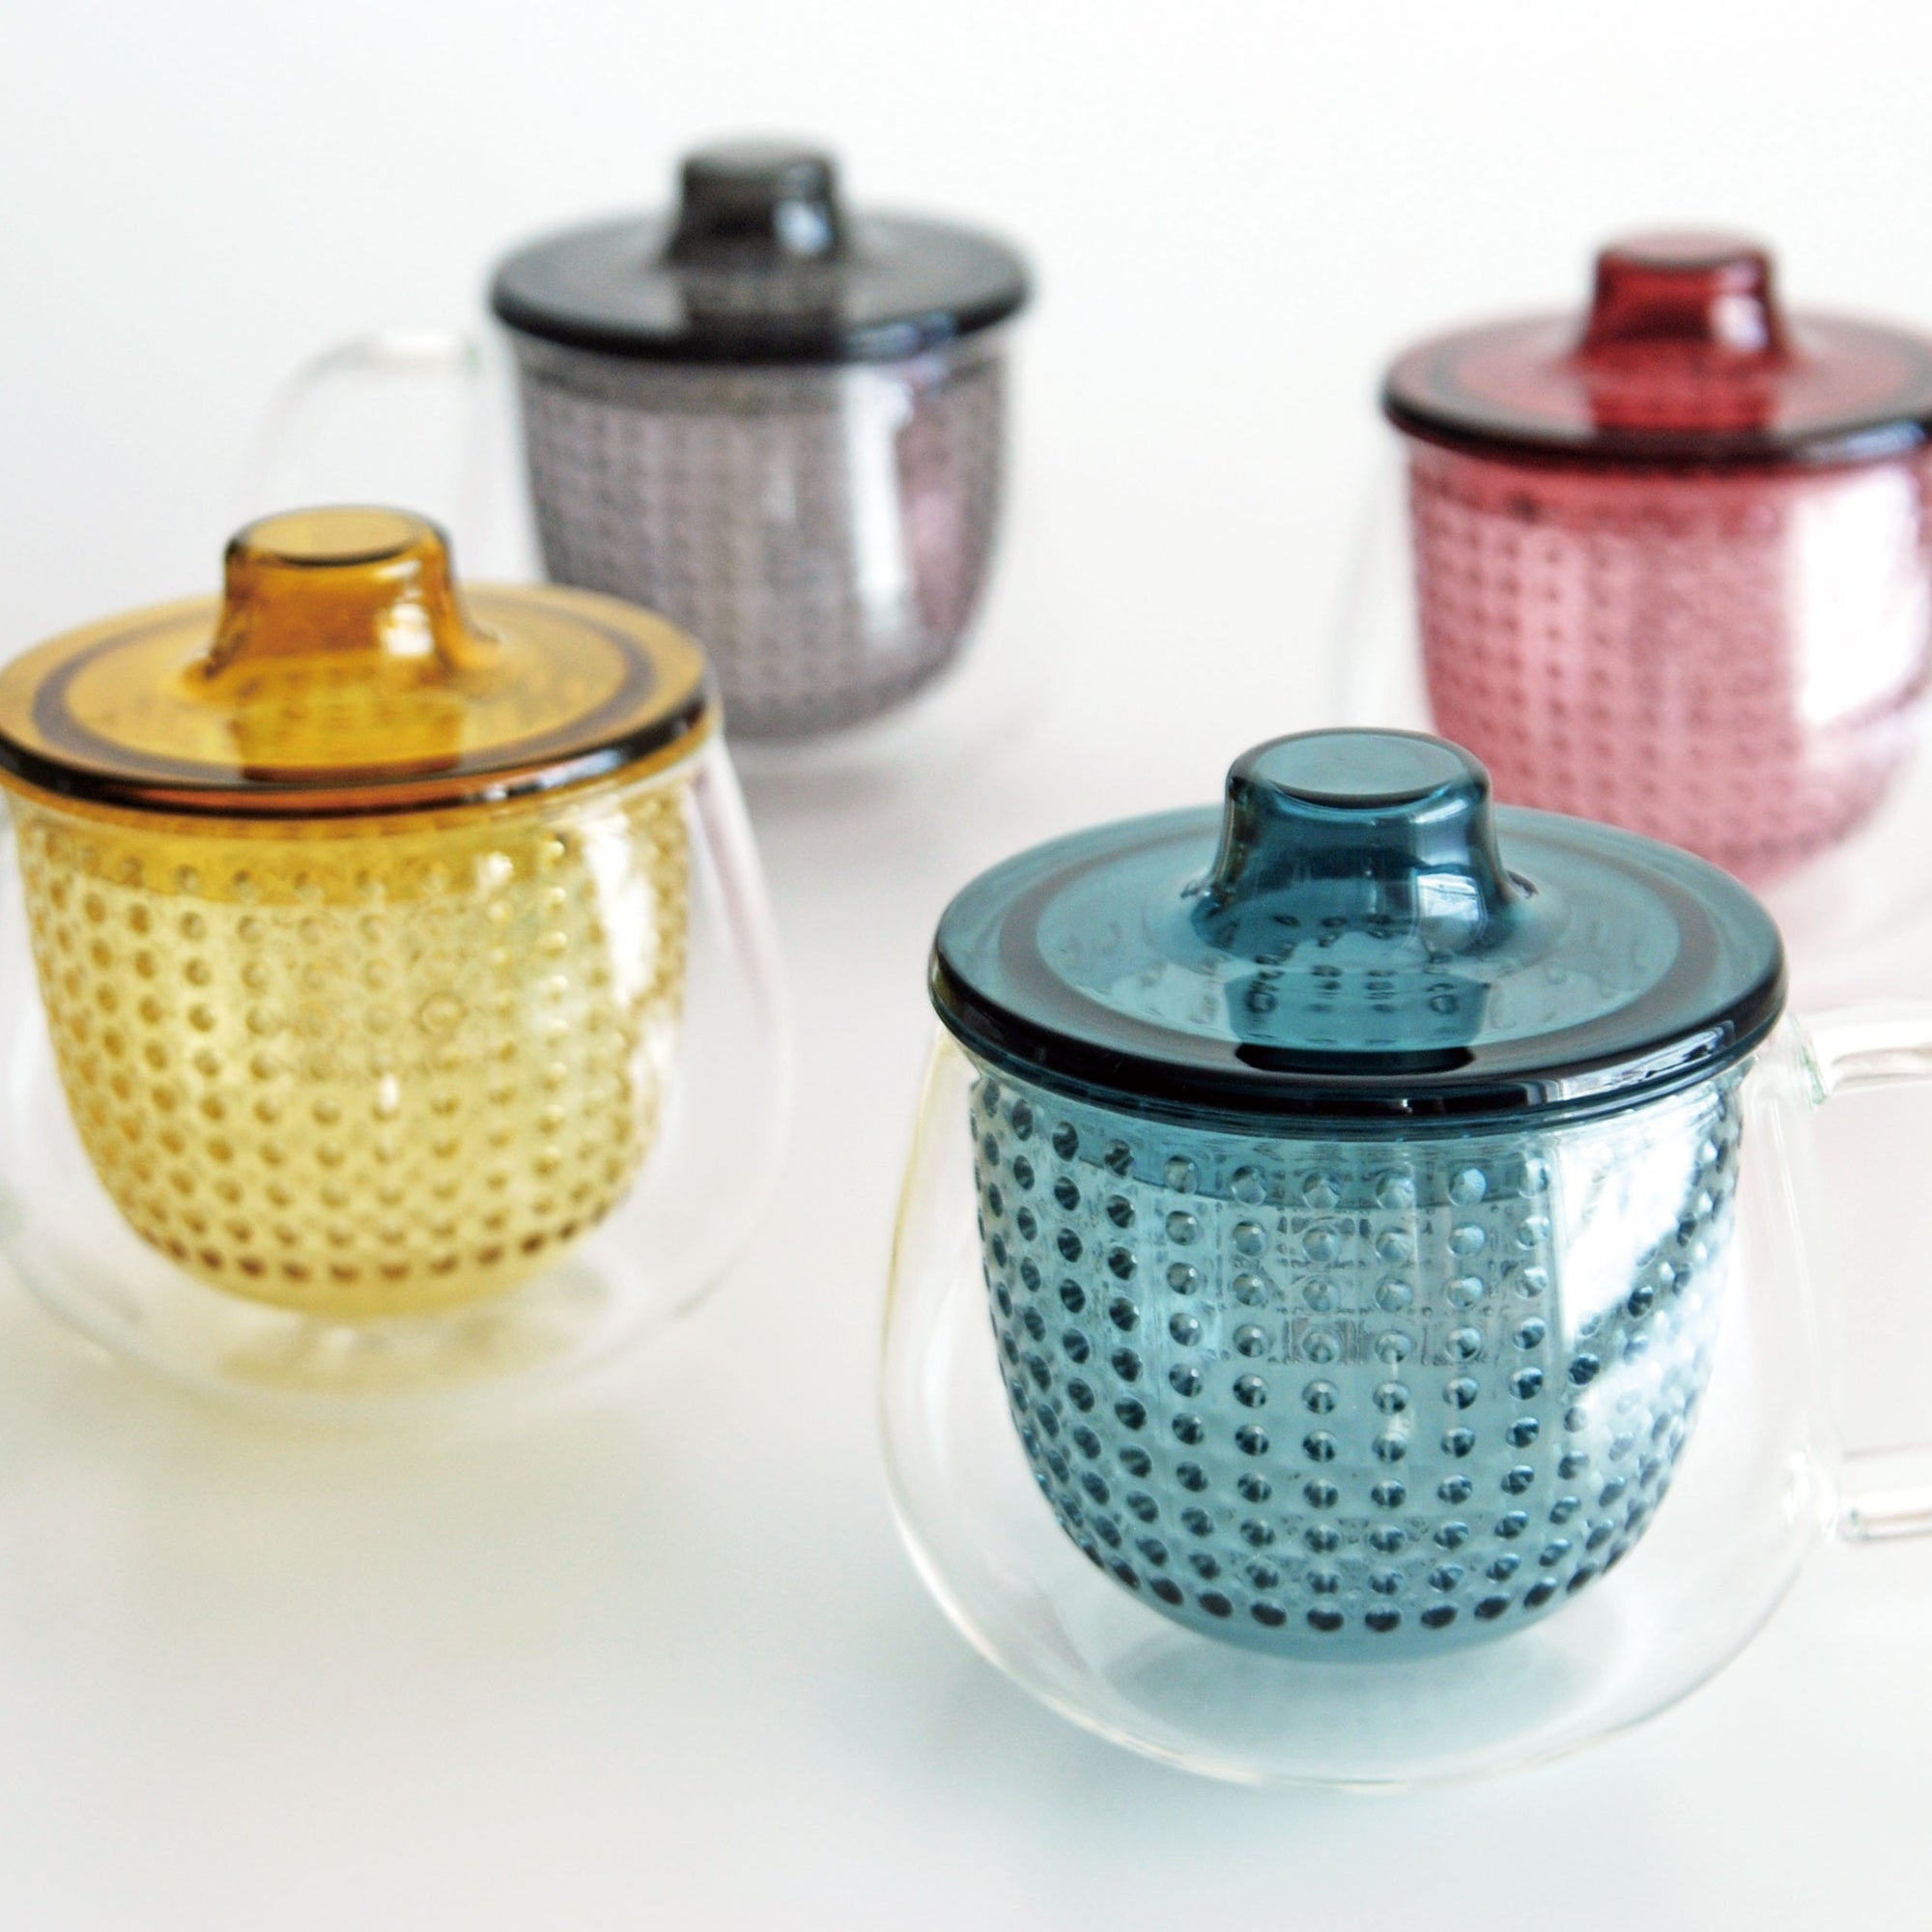 UNIMUG glass teapots in yellow, blue and red for loose leaf tea by The Rabbit Hole 